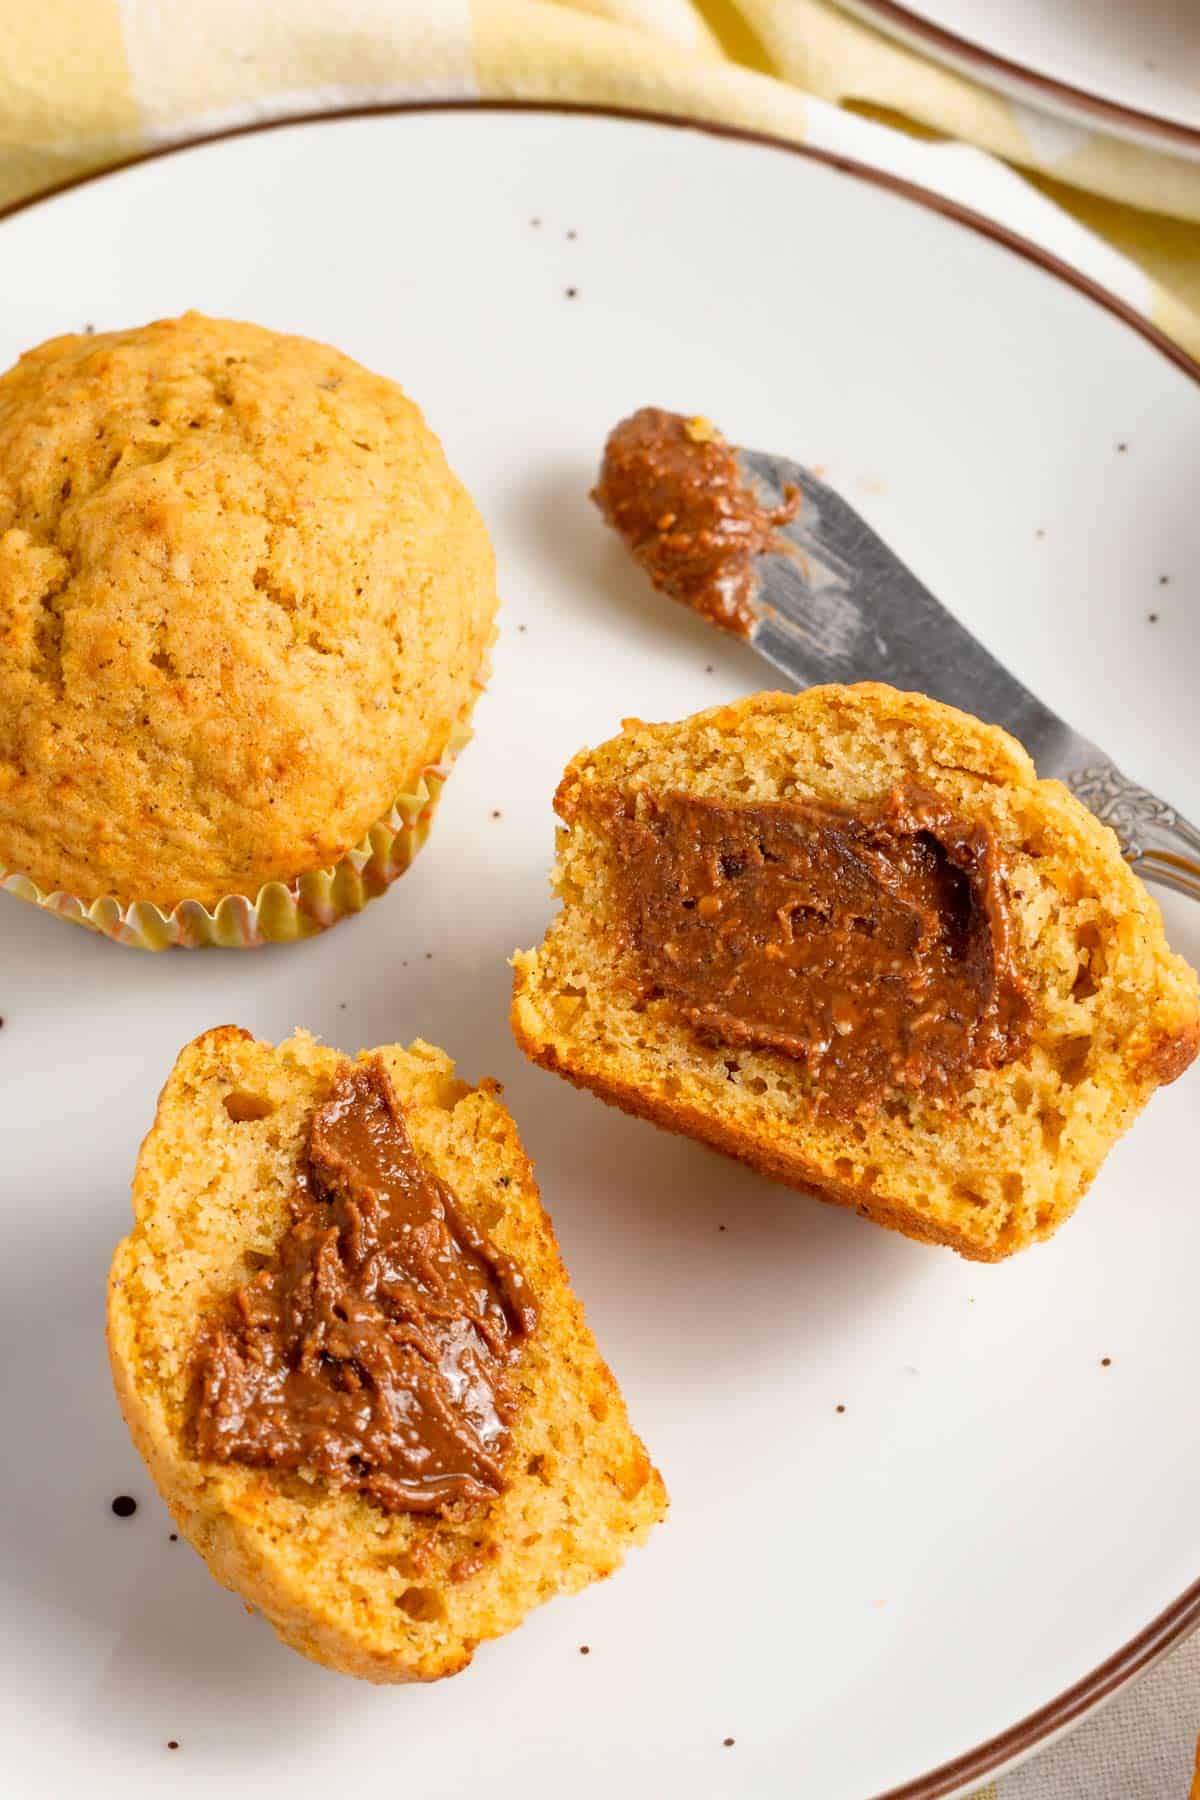 serving muffins with nutella spread.